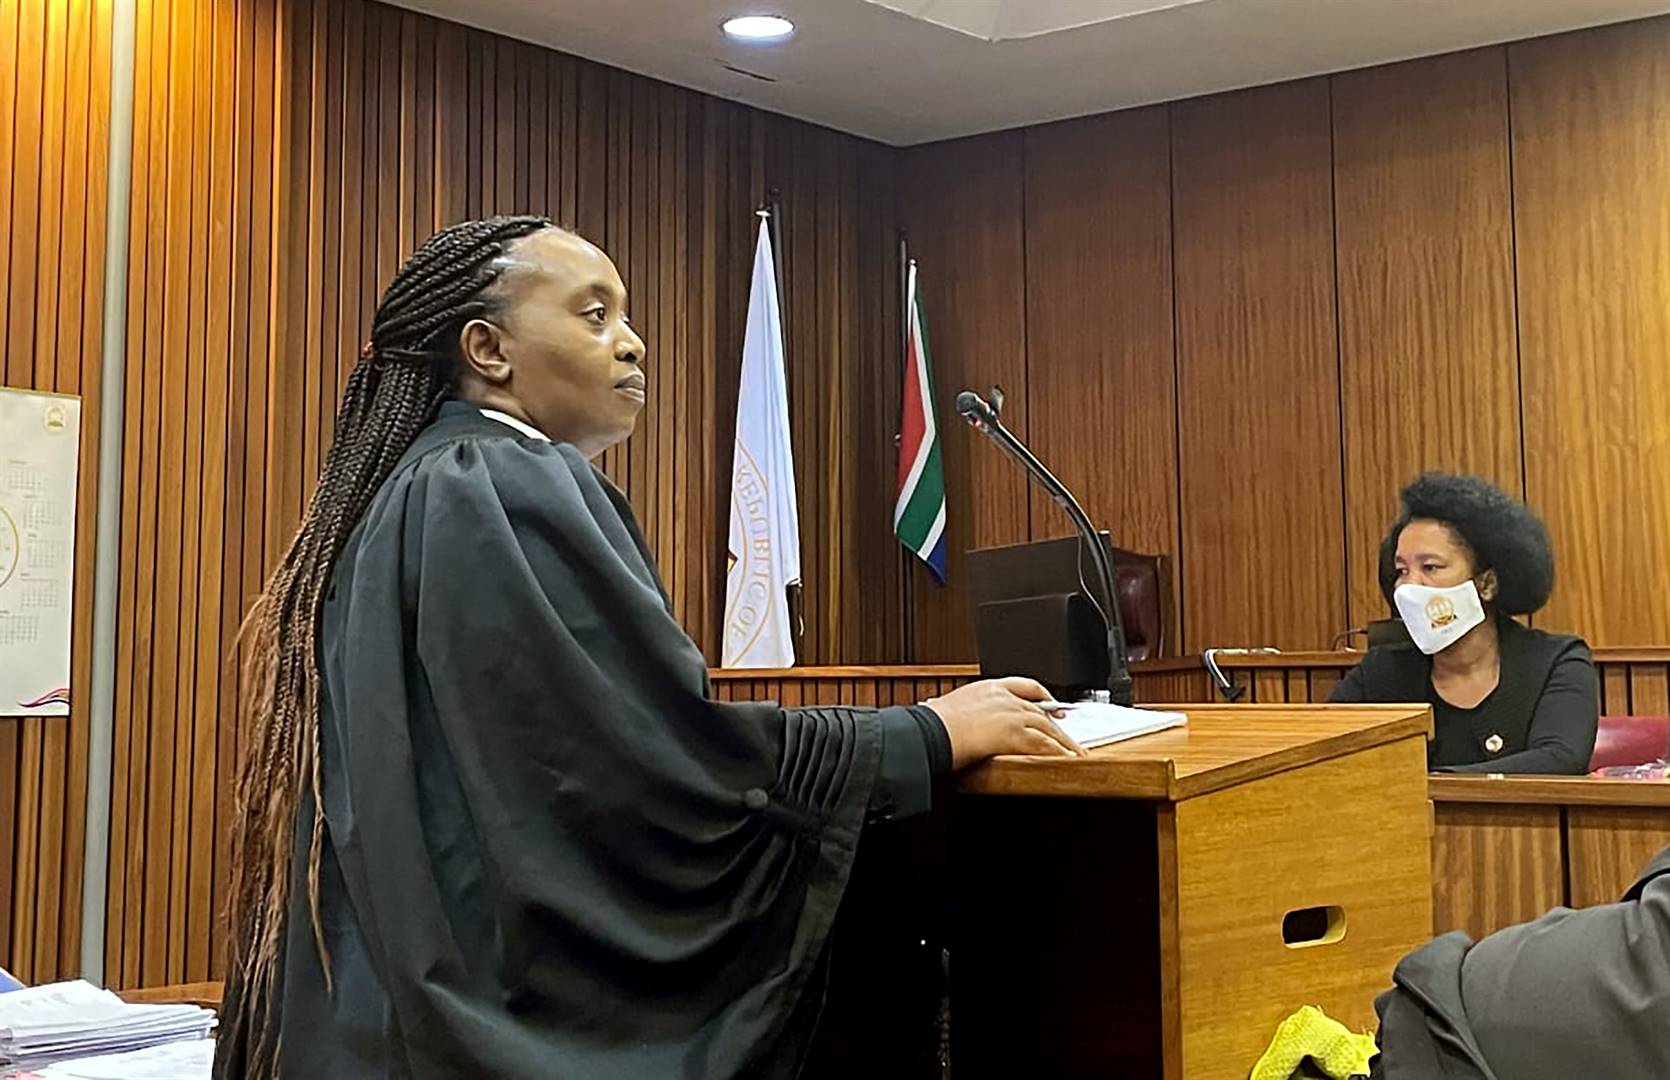 Advocate Zandile Mshololo in the North Gauteng High Court during Senzo Meyiwa's murder trial on Monday. Photo Kgomotso Medupe